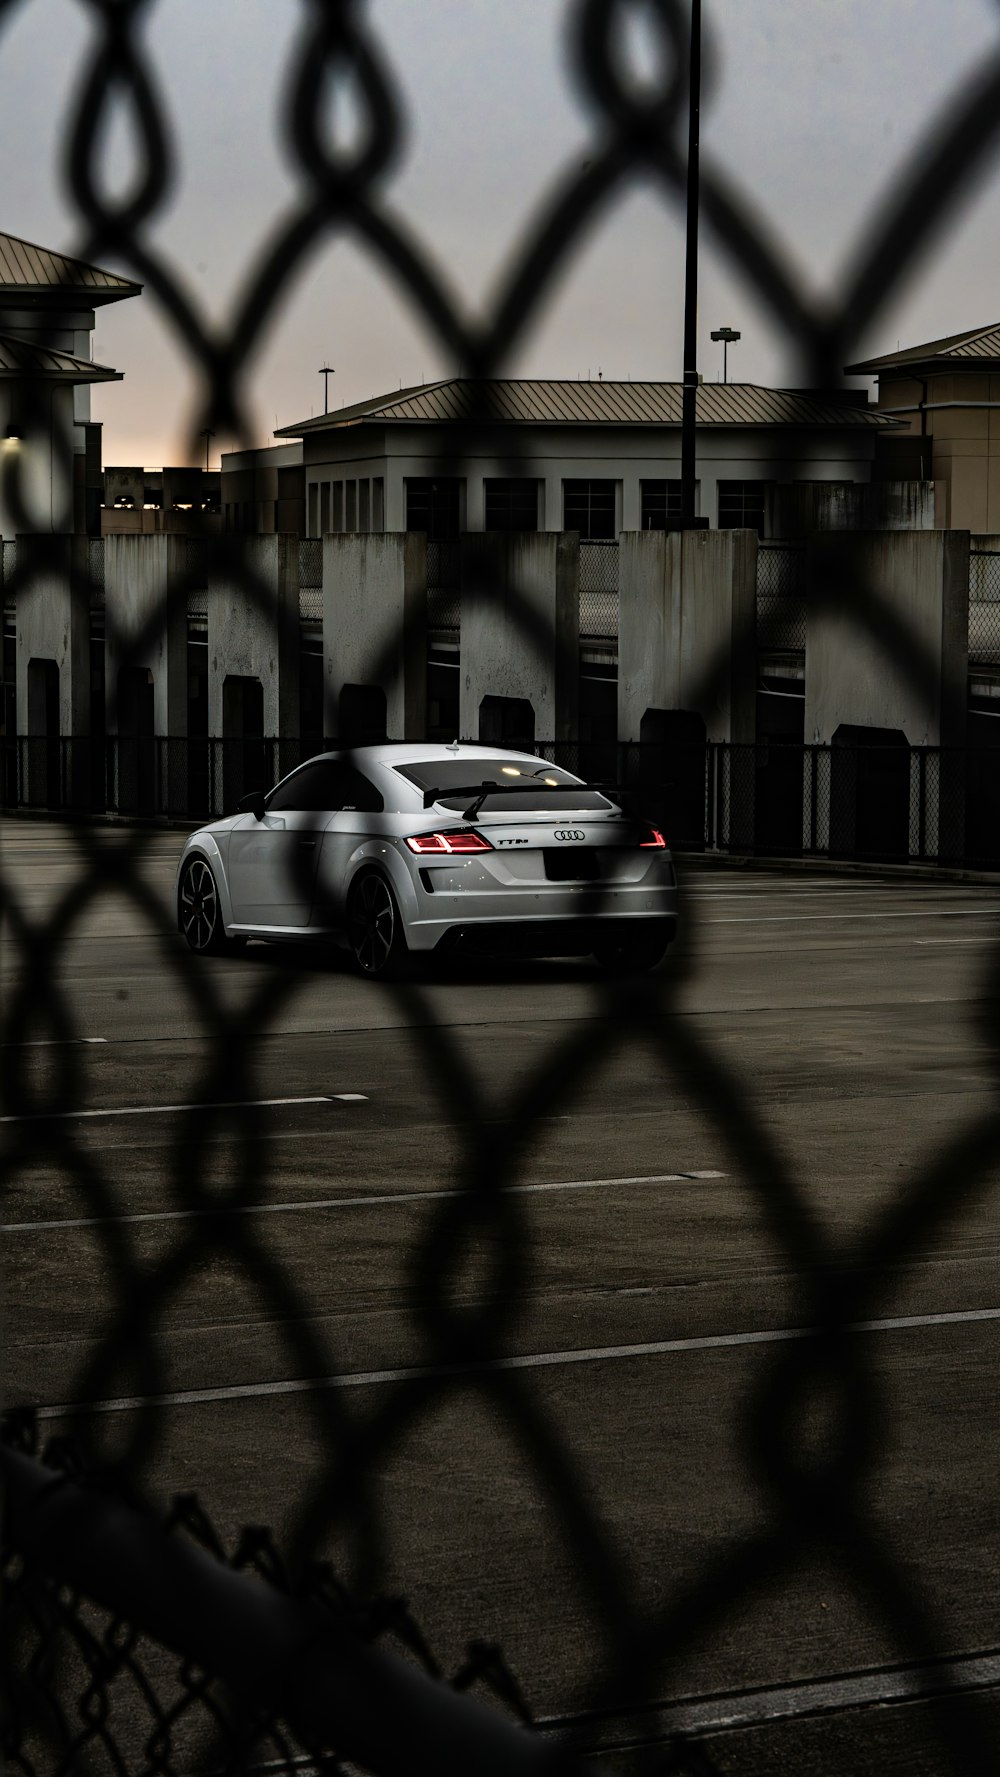 a car parked in a parking lot behind a chain link fence